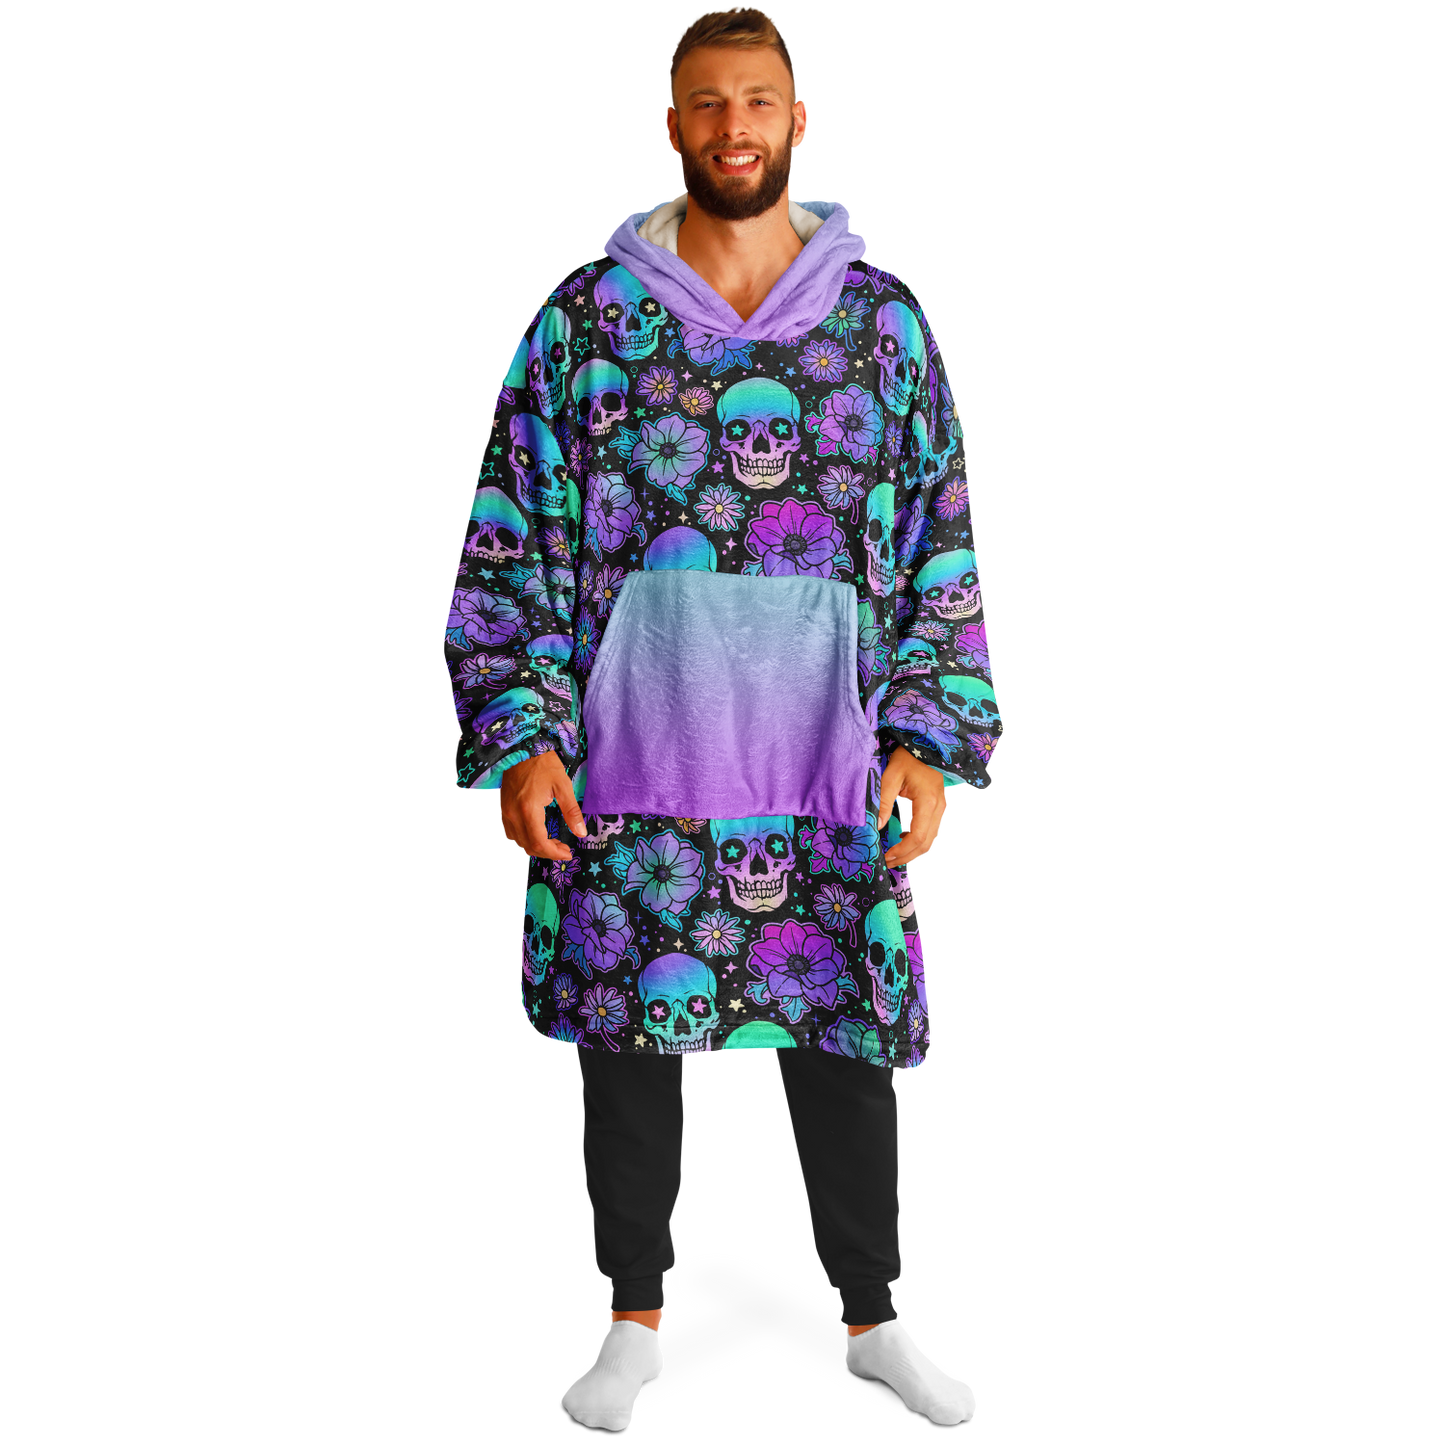 Rave Vibes Super Hoodie - Available for a Strictly Limited Time - Buy 2 & Get FREE Shipping